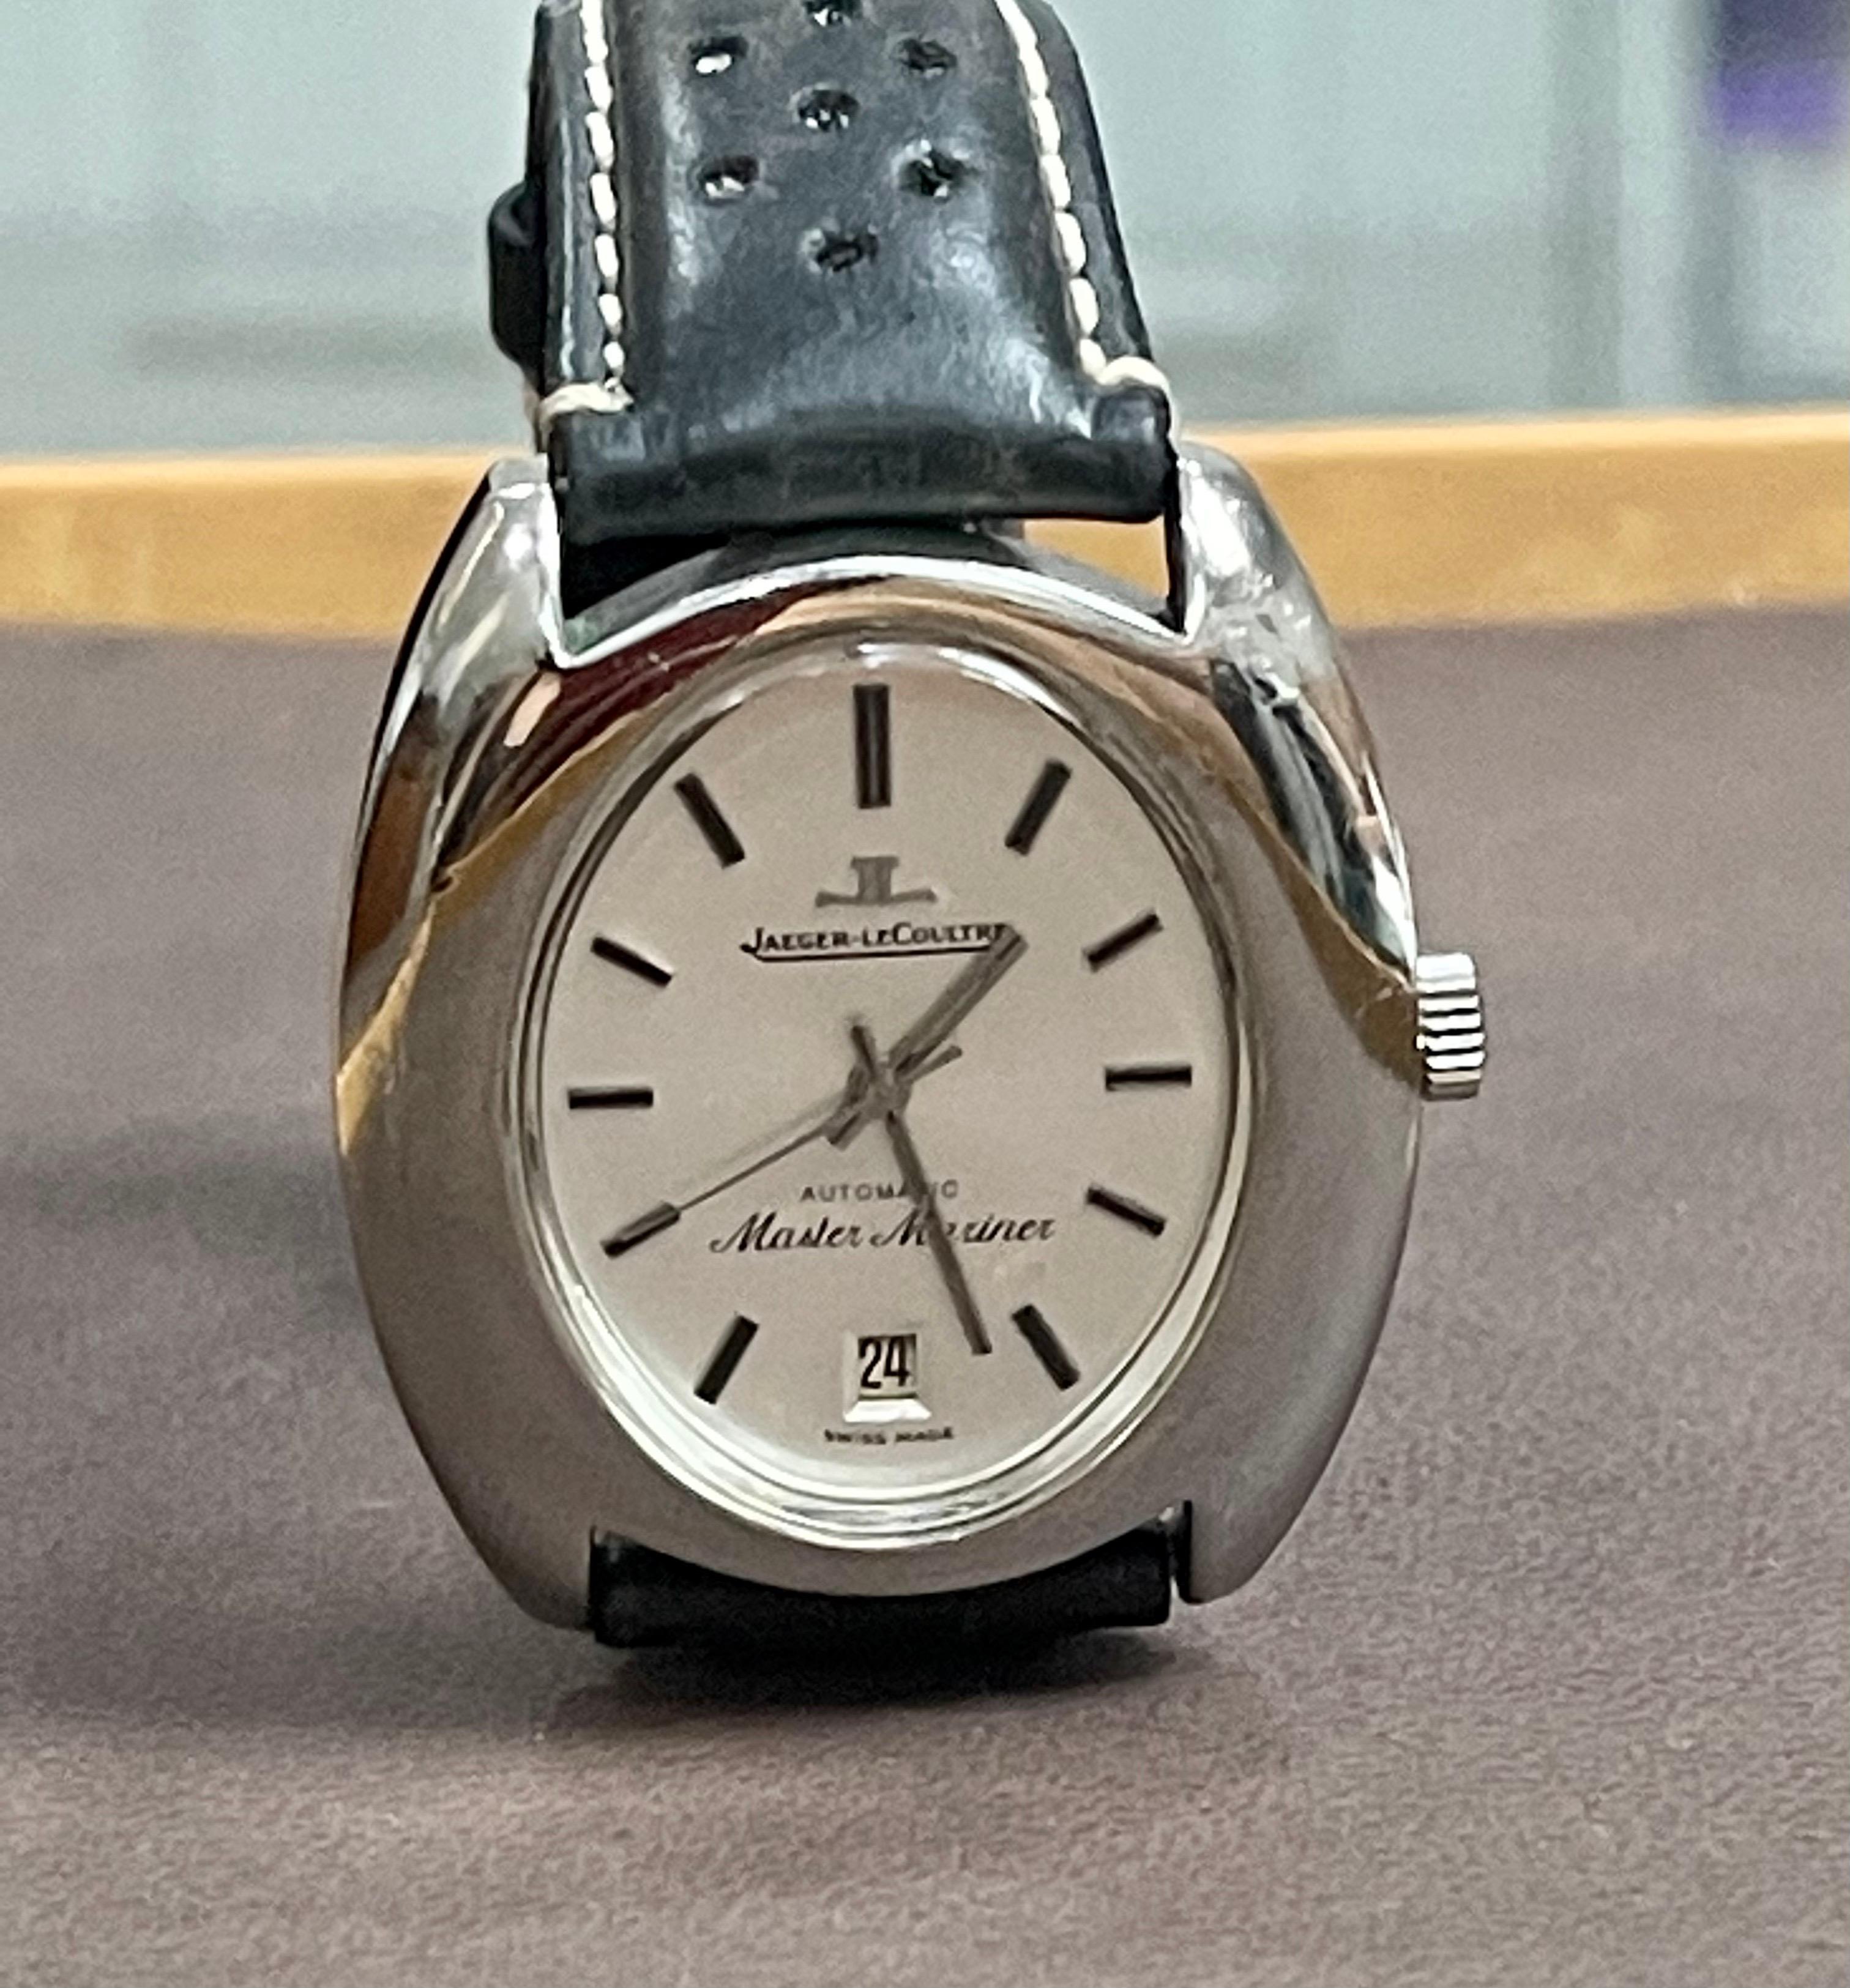 Jaeger Lecoultre Master Mariner E559 Automatic Winding For Sale 2